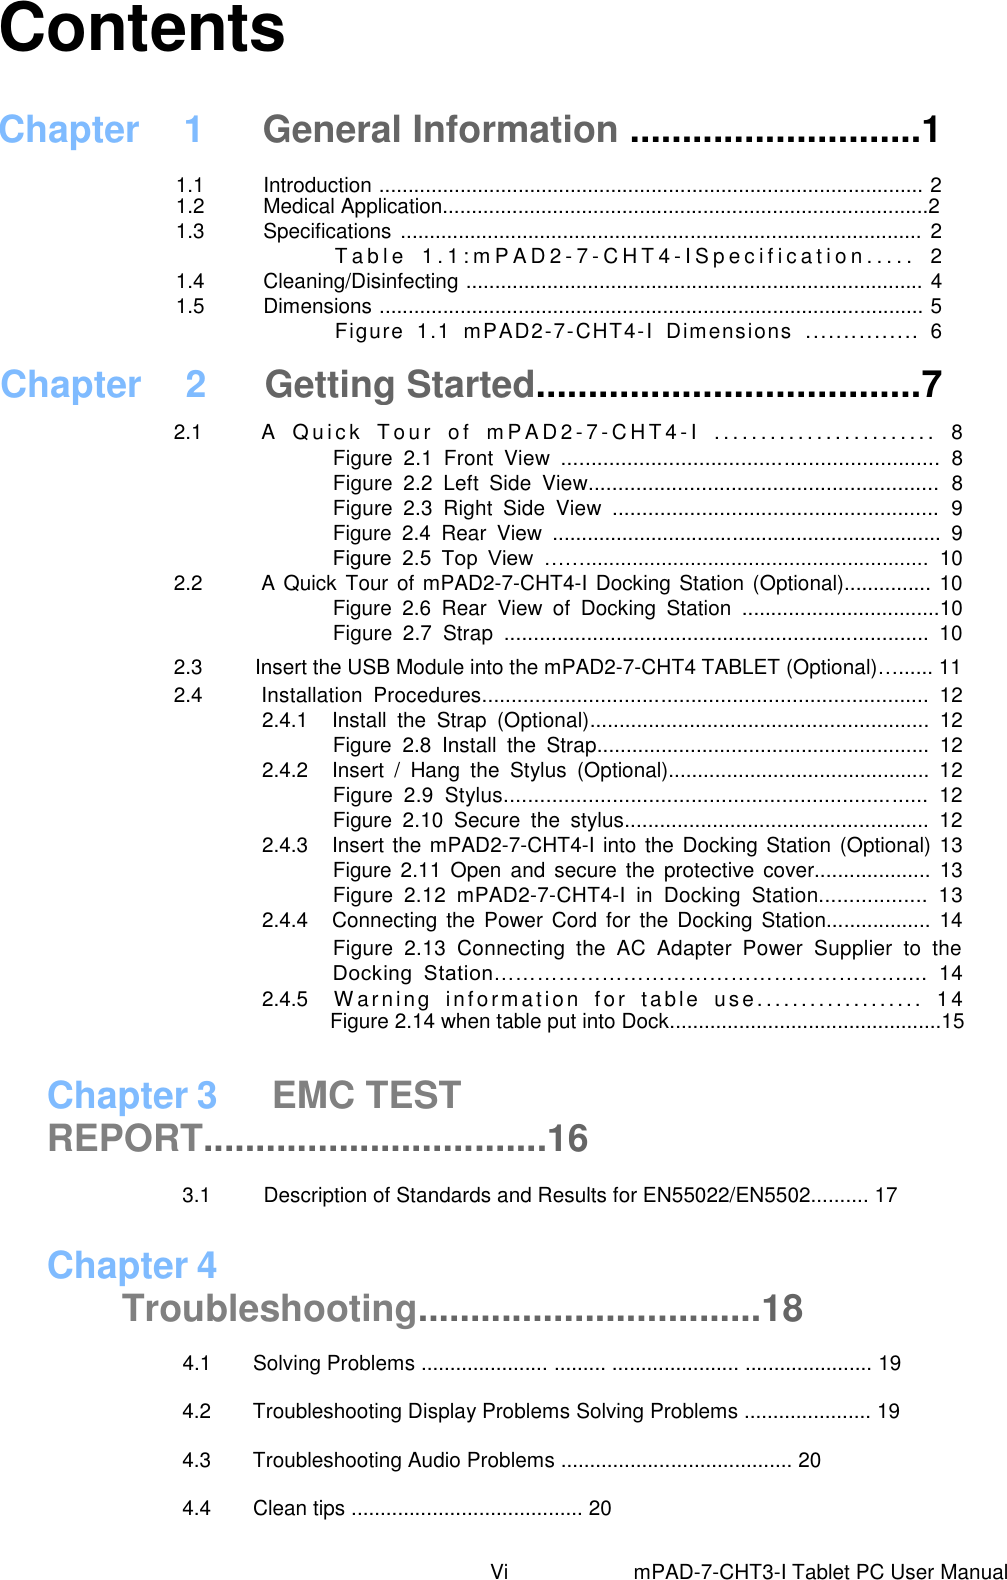                             Chapter 3  EMC TEST REPORT.................................16    3.1          Description of Standards and Results for EN55022/EN5502.......... 17  Chapter 4 Troubleshooting.................................18                         4.1        Solving Problems ...................... ......... ...................... ...................... 19 4.2     Troubleshooting Display Problems Solving Problems ...................... 19 4.3     Troubleshooting Audio Problems ........................................ 20 4.4     Clean tips ........................................ 20     Contents Chapter  1  General Information ............................1 1.1  Introduction .............................................................................................. 2 1.2  Medical Application....................................................................................2 1.3  Specifications  .......................................................................................... 2 T a b l e   1 . 1 : m P A D 2 - 7 - CHT4 - I S p e c i f i c a t i o n . . . . .   2 1.4  Cleaning/Disinfecting ............................................................................... 4 1.5  Dimensions .............................................................................................. 5 Figure  1.1  mPAD2-7-CHT4-I  Dimensions  ...............  6 Chapter  2  Getting Started.....................................7 2.1  A   Q u ic k   T o u r   o f   m P A D 2- 7 - C HT 4 - I   . . . .. . . . . .. . . . . . . . .. . . . .  8 Figure  2.1  Front  View  ...............................................................  8   Figure  2.2  Left  Side  View...........................................................  8   Figure  2.3  Right  Side  View  .......................................................  9   Figure  2.4  Rear  View  ...................................................................  9   Figure  2.5  Top  View  ……...........................................................  10 2.2  A Quick Tour of mPAD2-7-CHT4-I Docking Station (Optional)............... 10 Figure  2.6  Rear  View  of  Docking  Station  ..................................10 Figure  2.7  Strap  ........................................................................  10 2.3          Insert the USB Module into the mPAD2-7-CHT4 TABLET (Optional)…...... 11 2.4  Installation  Procedures...........................................................................  12 2.4.1  Install  the  Strap  (Optional)..........................................................  12 Figure  2.8  Install  the  Strap.........................................................  12 2.4.2  Insert  /  Hang  the  Stylus  (Optional).............................................  12 Figure  2.9  Stylus......................................................................  12 Figure  2.10  Secure  the  stylus....................................................  12 2.4.3  Insert the mPAD2-7-CHT4-I into the Docking Station (Optional) 13 Figure  2.11  Open and  secure  the protective  cover....................  13 Figure  2.12  mPAD2-7-CHT4-I  in  Docking  Station..................  13 2.4.4  Connecting  the Power  Cord  for  the Docking  Station.................. 14 Figure  2.13  Connecting  the  AC  Adapter  Power  Supplier  to  the Docking  Station……………………………………………….......  14 2.4.5    W arn i ng  inf orm ation   f or  tab le   us e. ..................  14 Figure 2.14 when table put into Dock...............................................15                       Vi                        mPAD-7-CHT3-I Tablet PC User Manual 